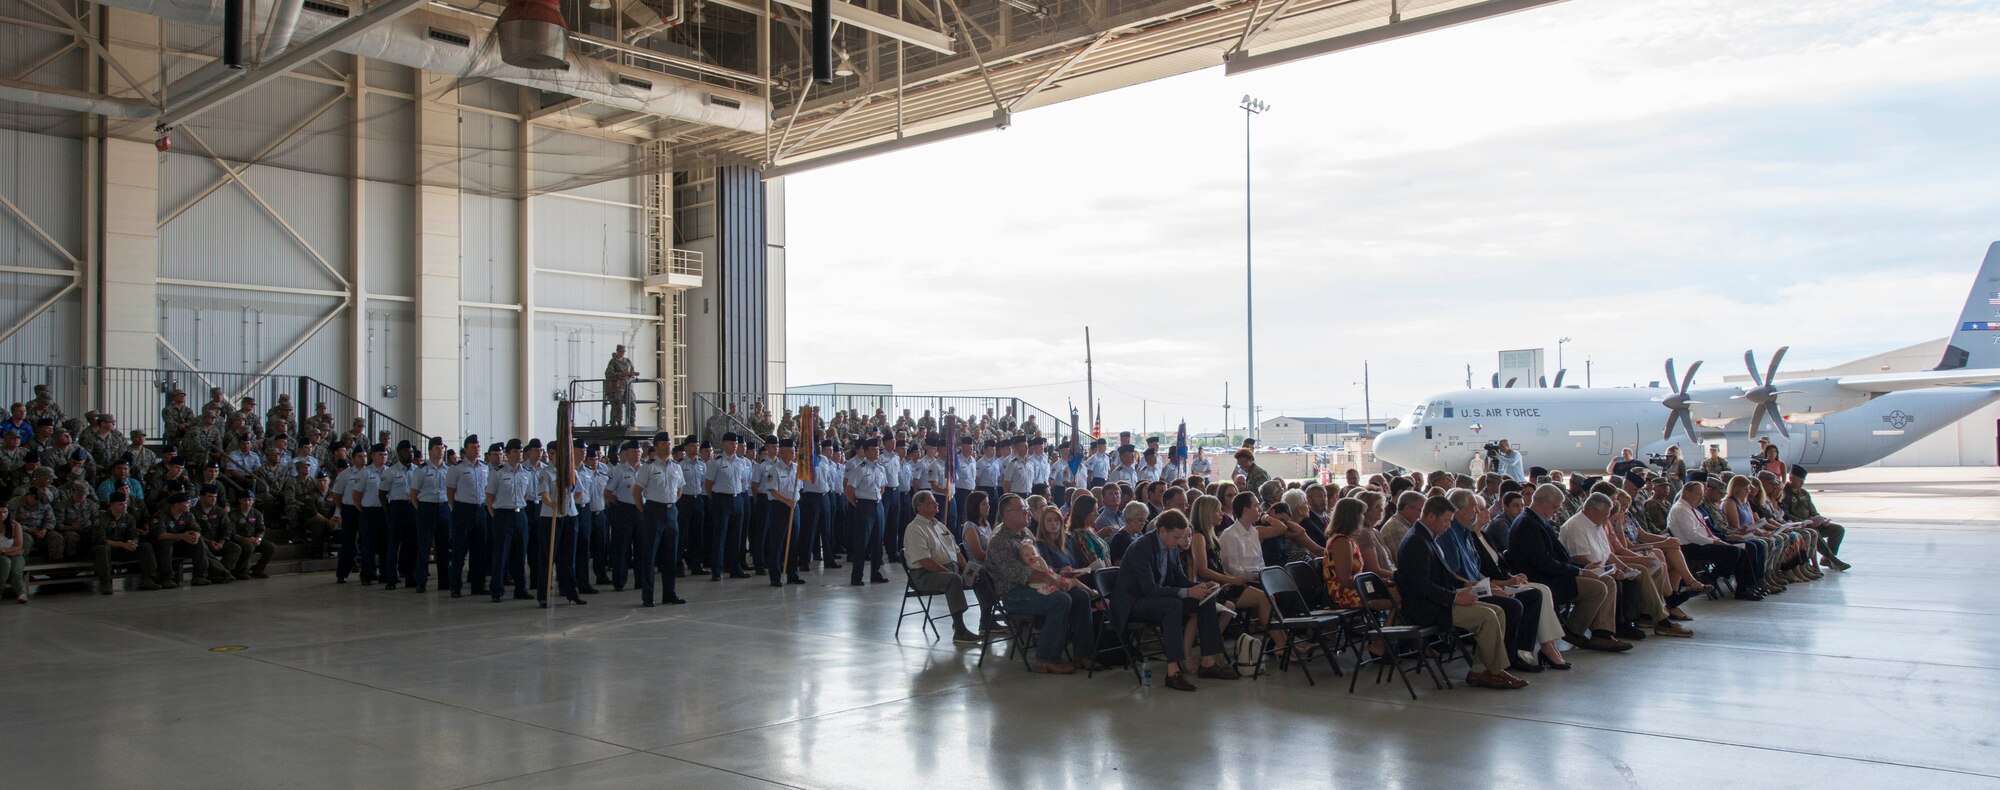 U.S. Air Force Airmen, Abilene civic leaders and family members attend the 317th Airlift Wing activation ceremony at Dyess Air Force Base, Texas, July 6, 2017. Dyess now hosts two wings in support of the bomber and airlift missions. (U.S. Air Force photo by Senior Airman Austin Mayfield)